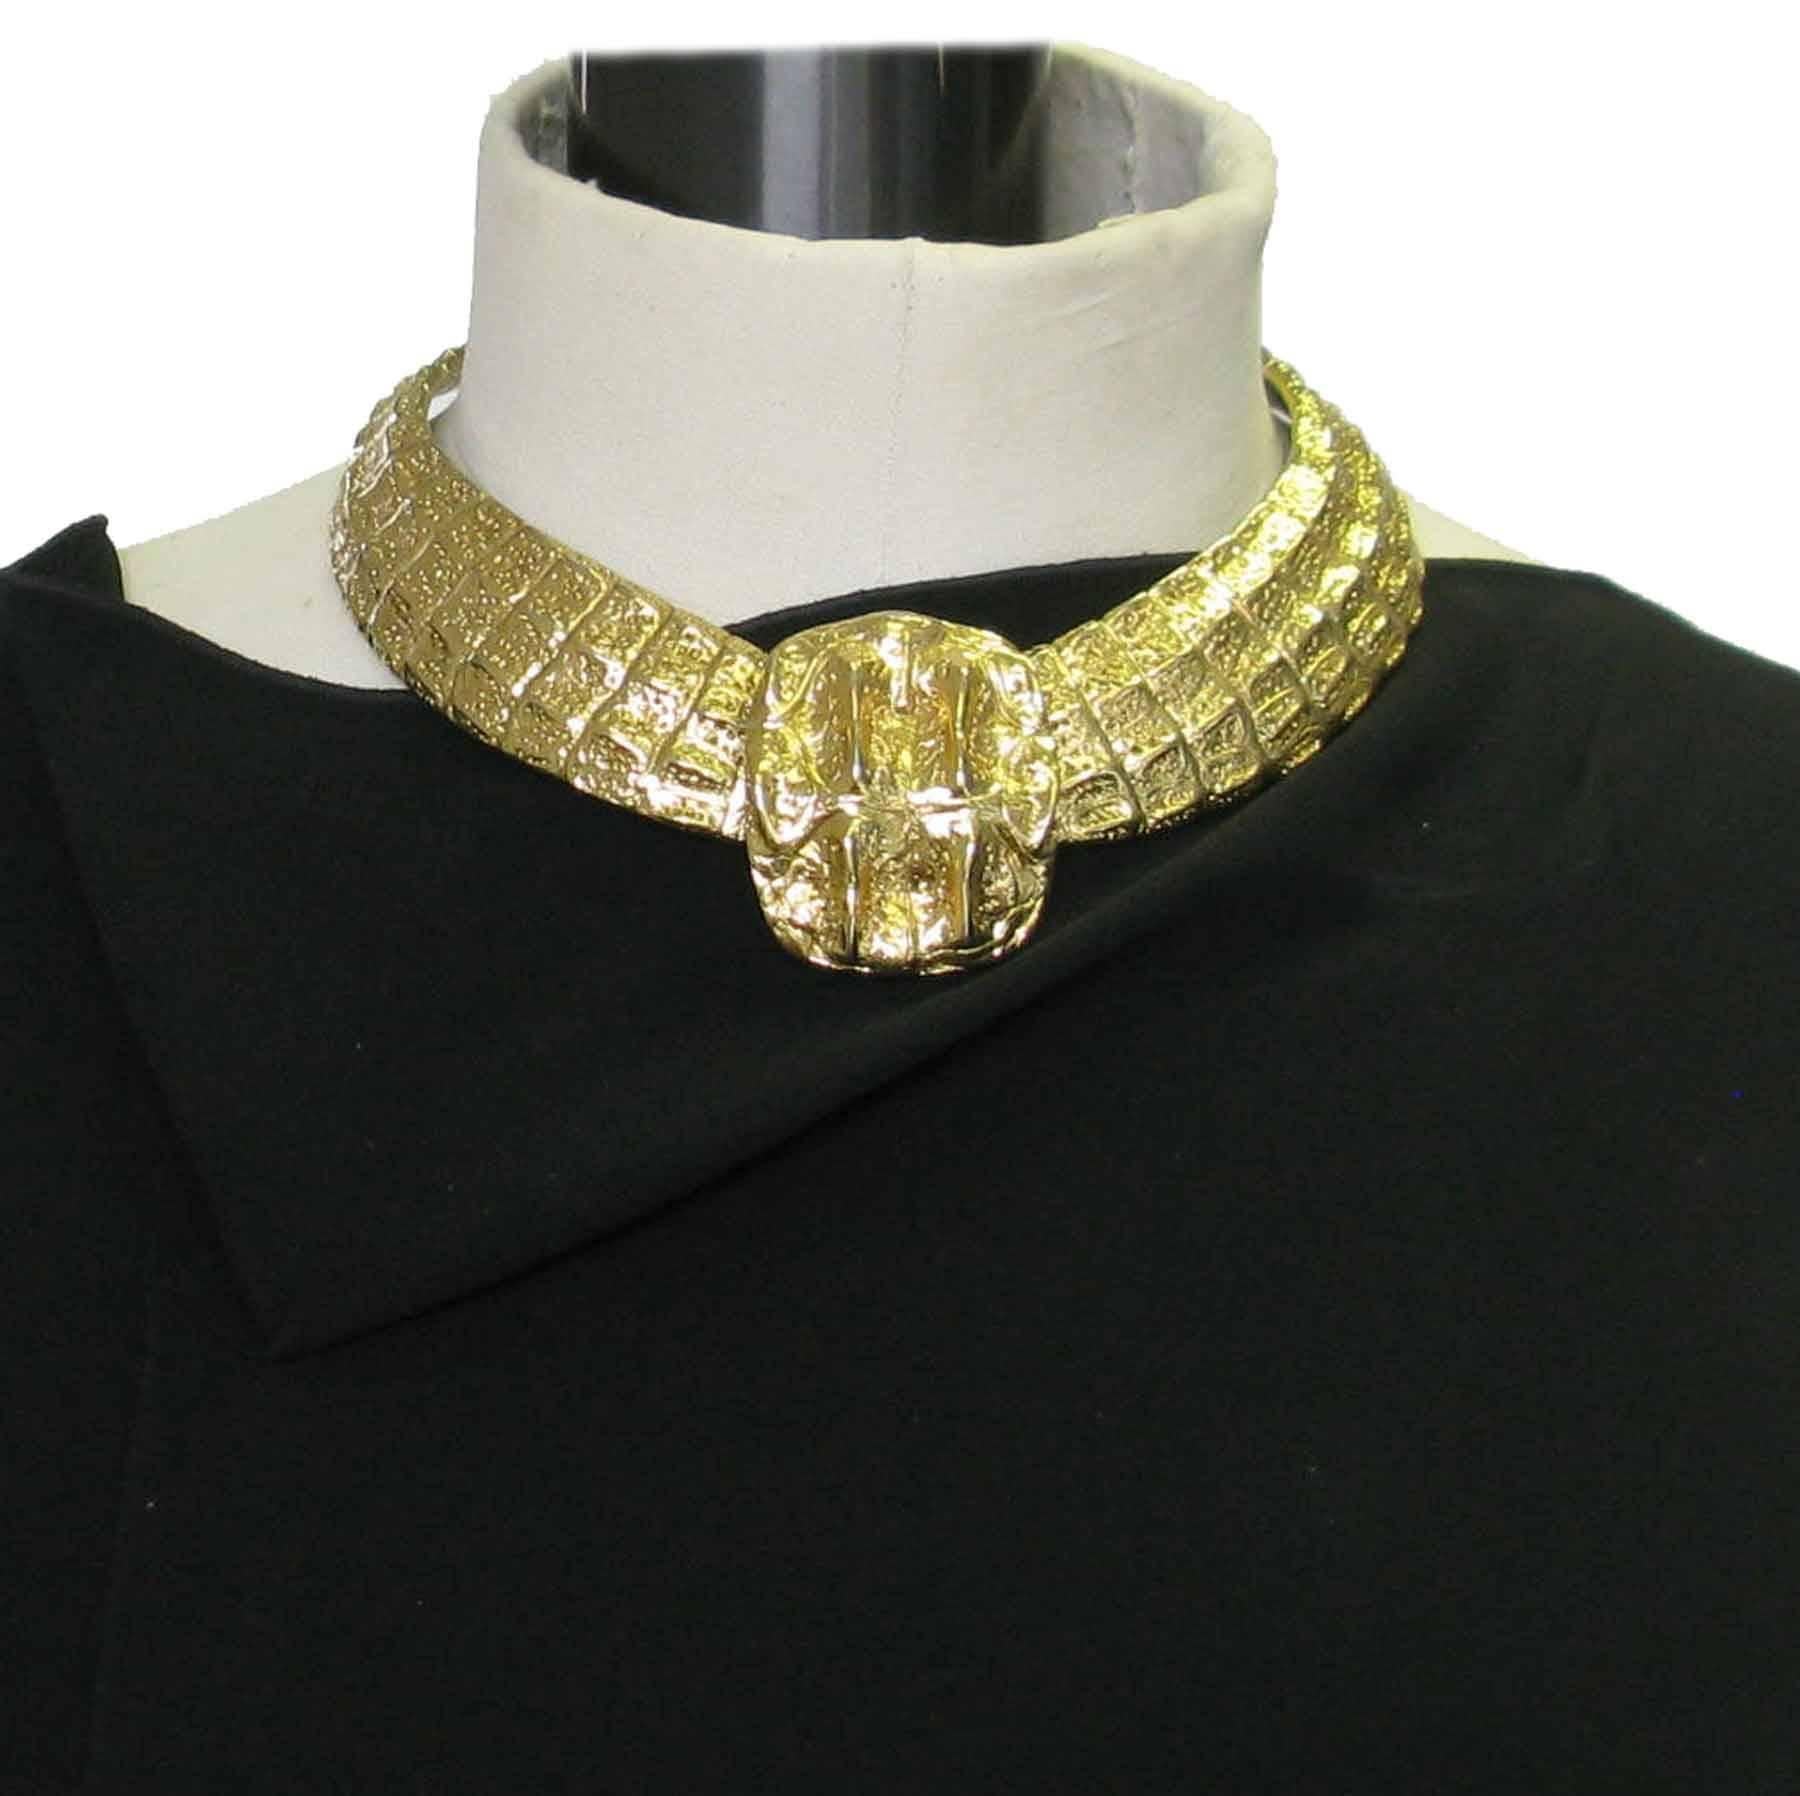 Stunning YSL YVES SAINT LAURENT choker necklace in gilded metal. The metal is worked to imitate the crocodile skin. Hook clasp. A small plate signed YSL ends the chain of the clasp.

Dimensions: at the shortest: 42 cm, the center piece measures: